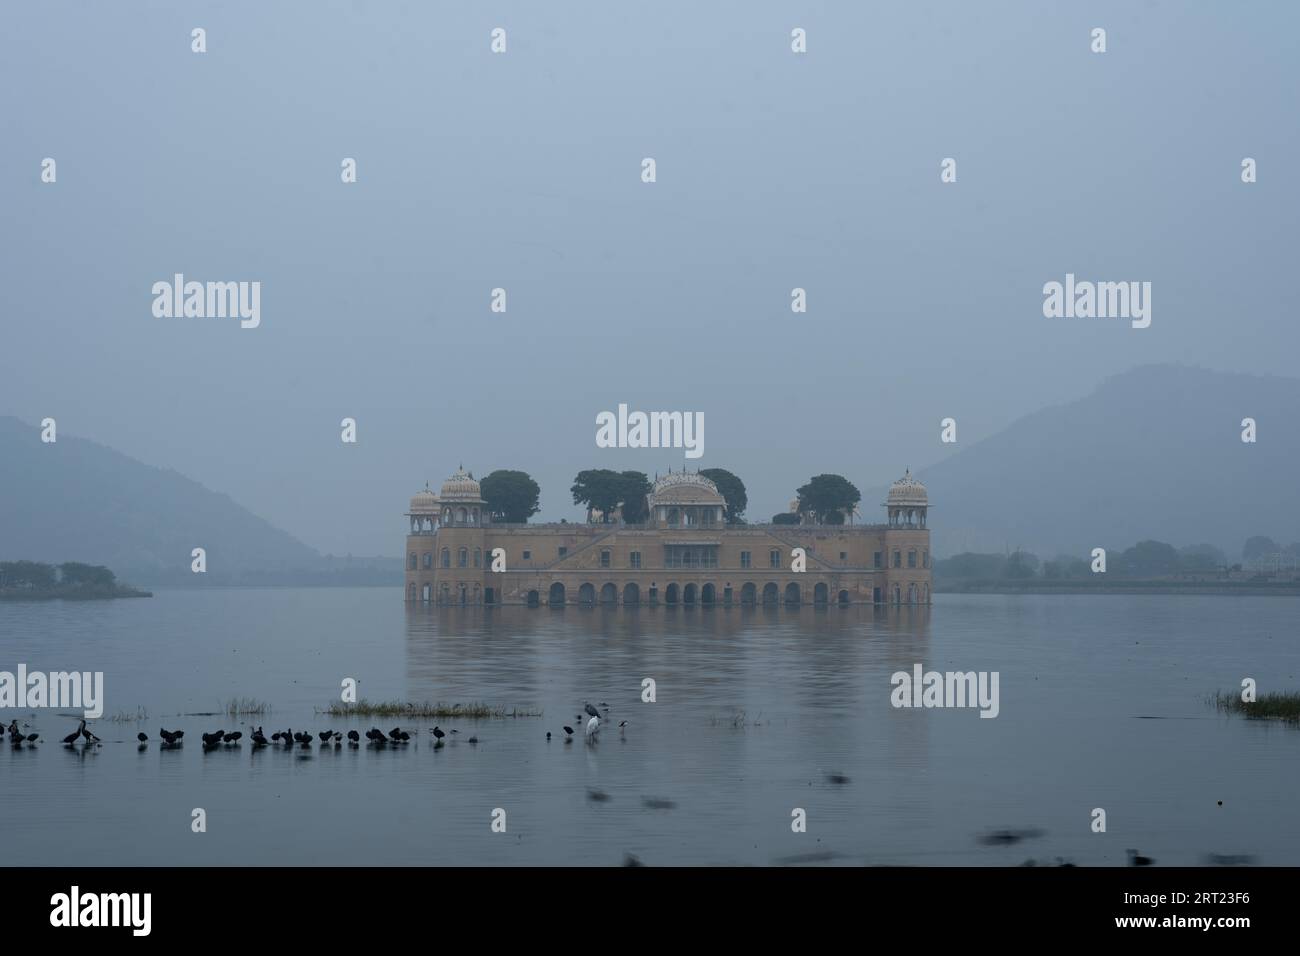 Jaipur, India, December 12, 2019: The Water Palace Jal Mahal on a foggy morning Stock Photo